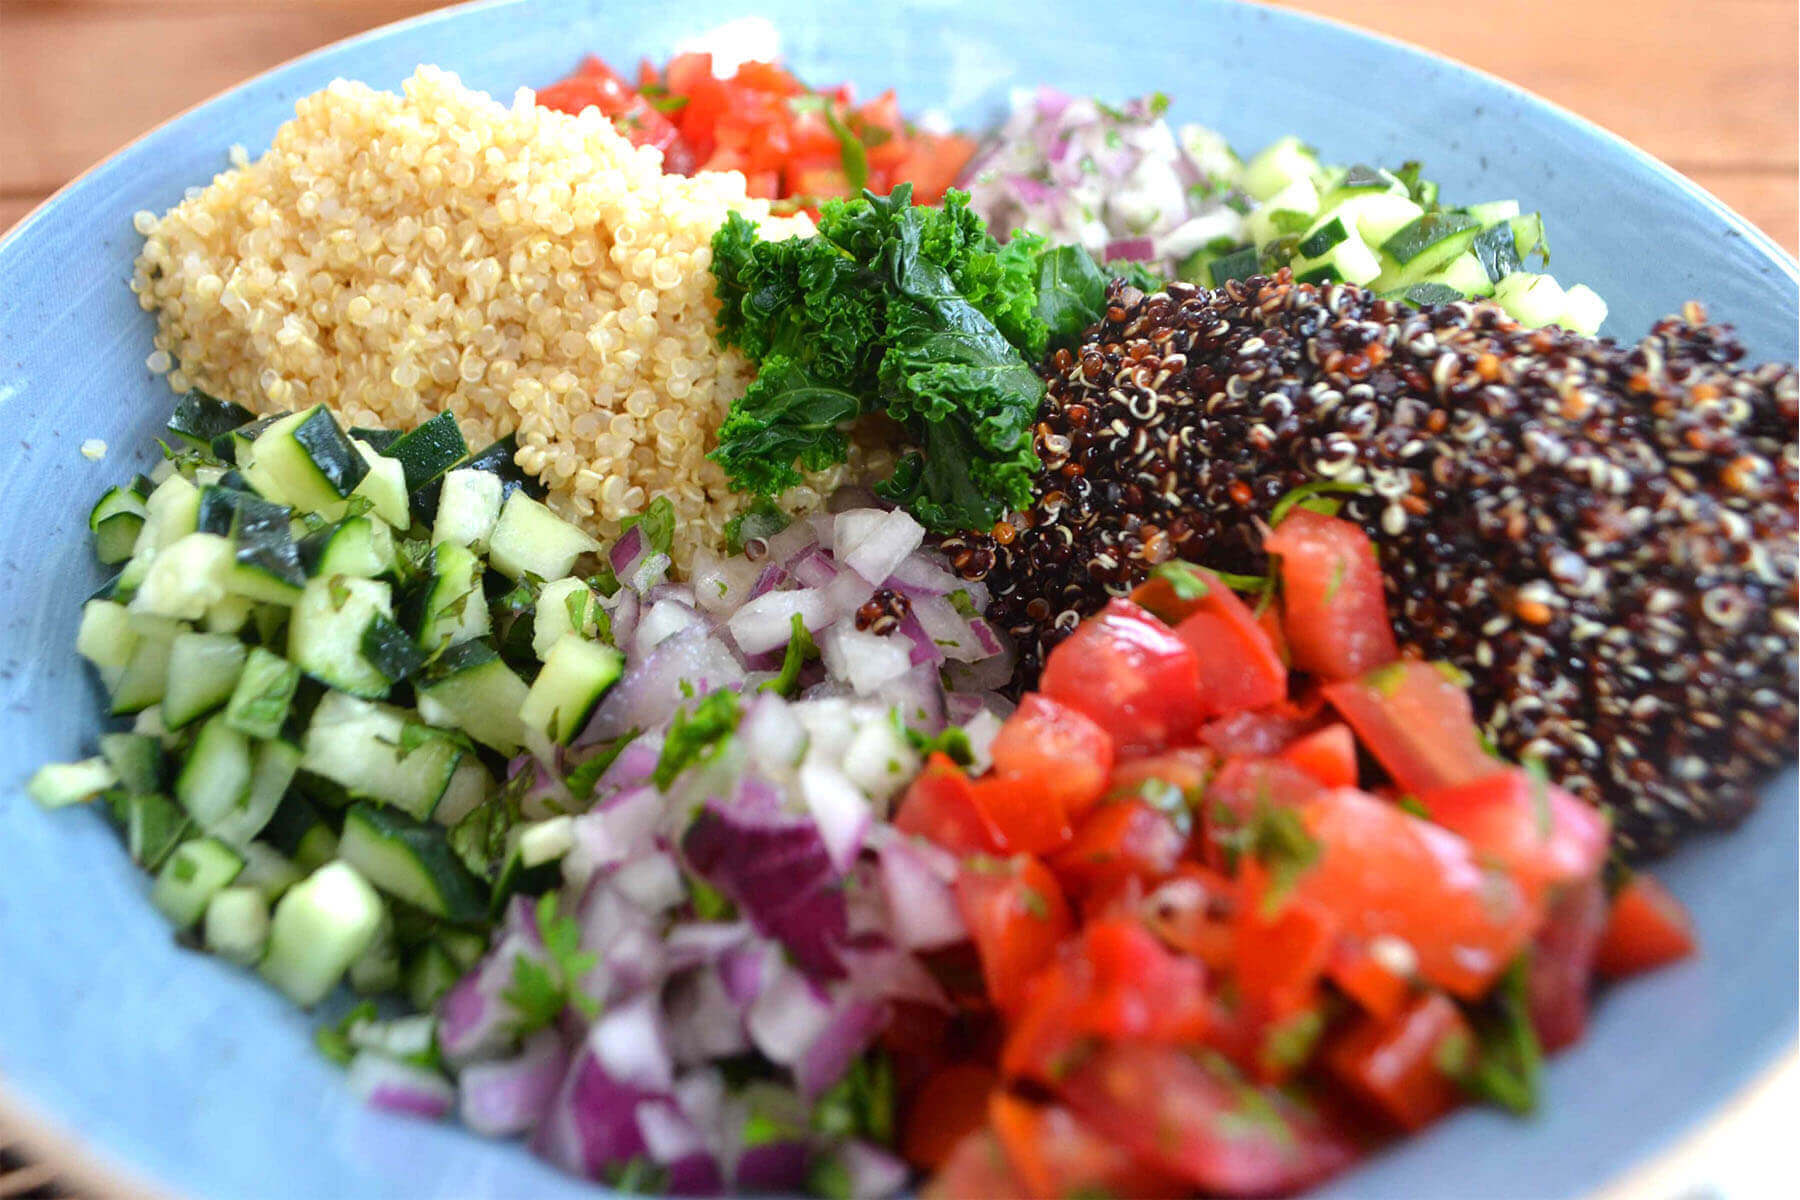 ‘Black and White’ Quinoa Tabbouleh with crudités